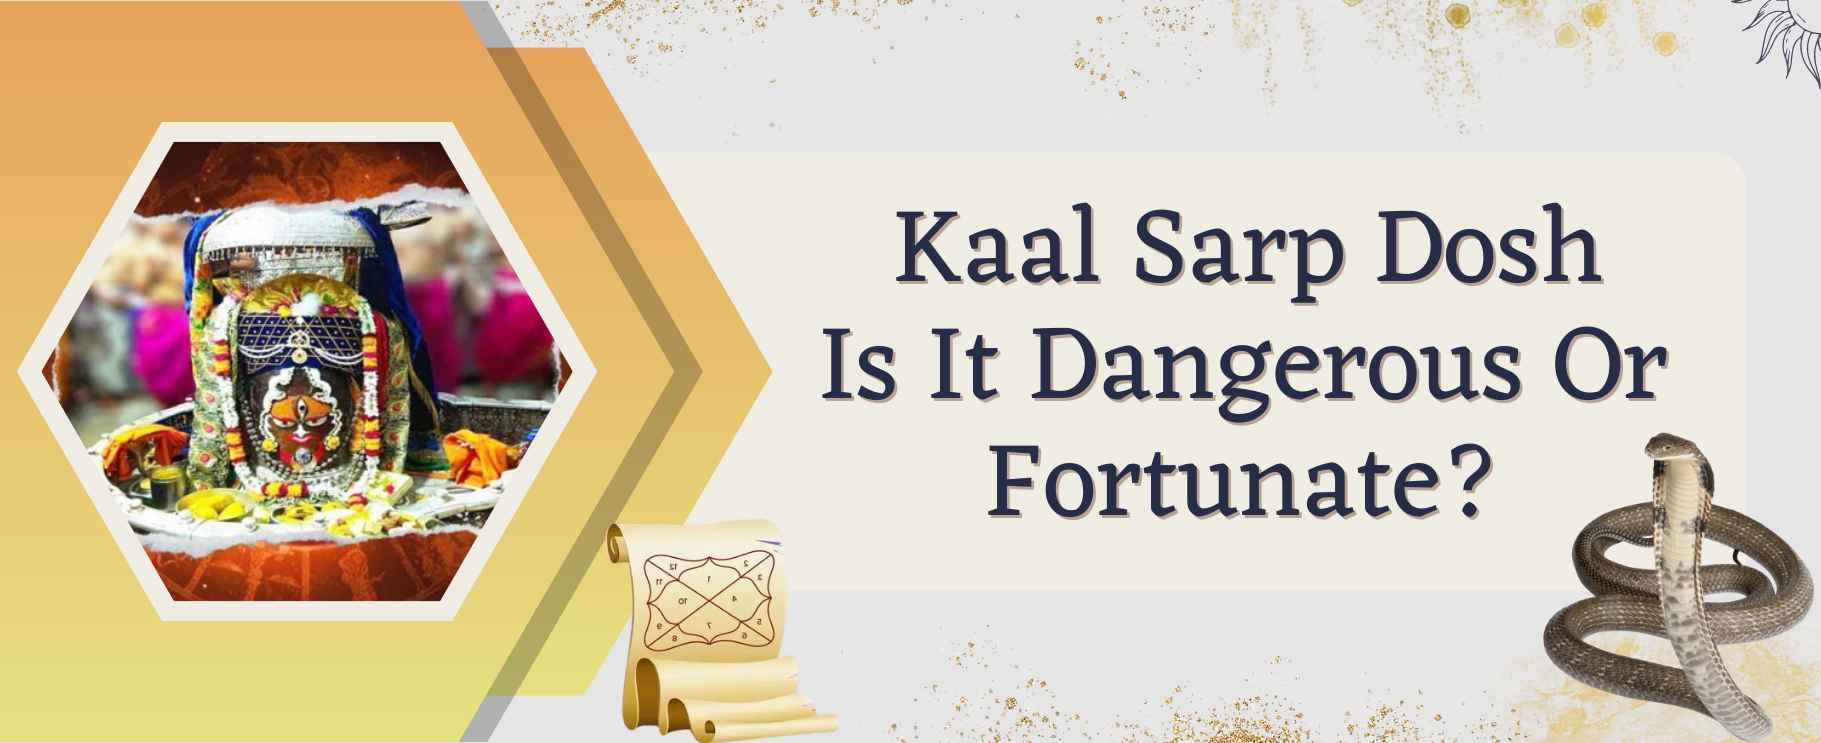 Kaal-Sarpa-Dosh-Is-It-Dangerous-Or-Fortunate